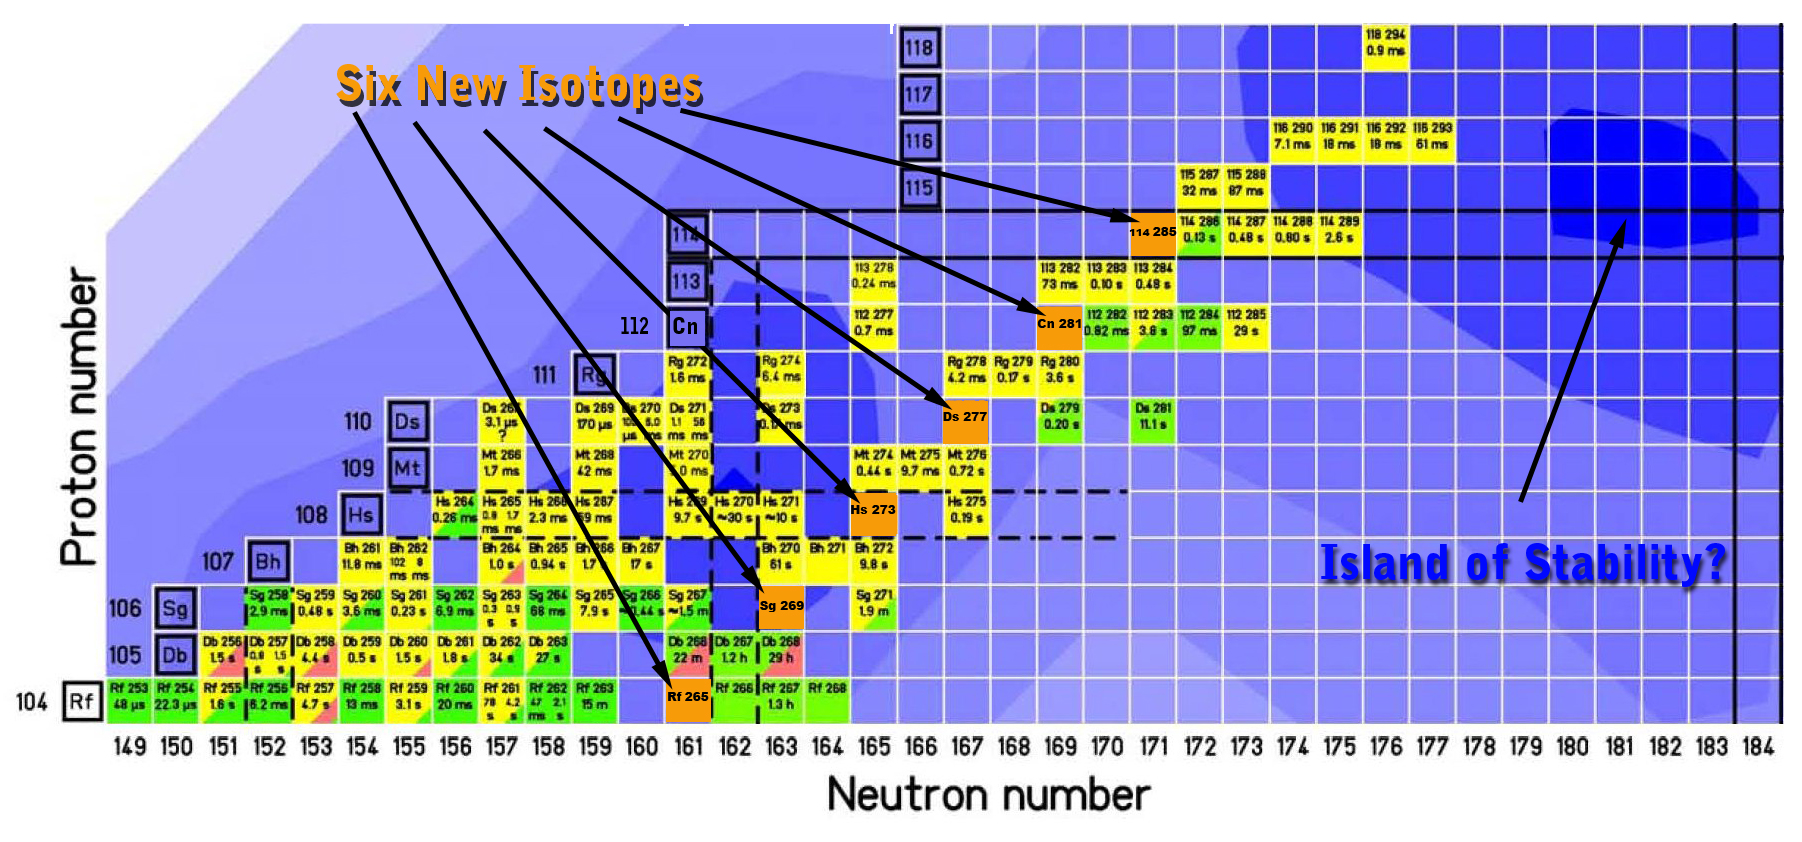 New isotopes marked on a chart.